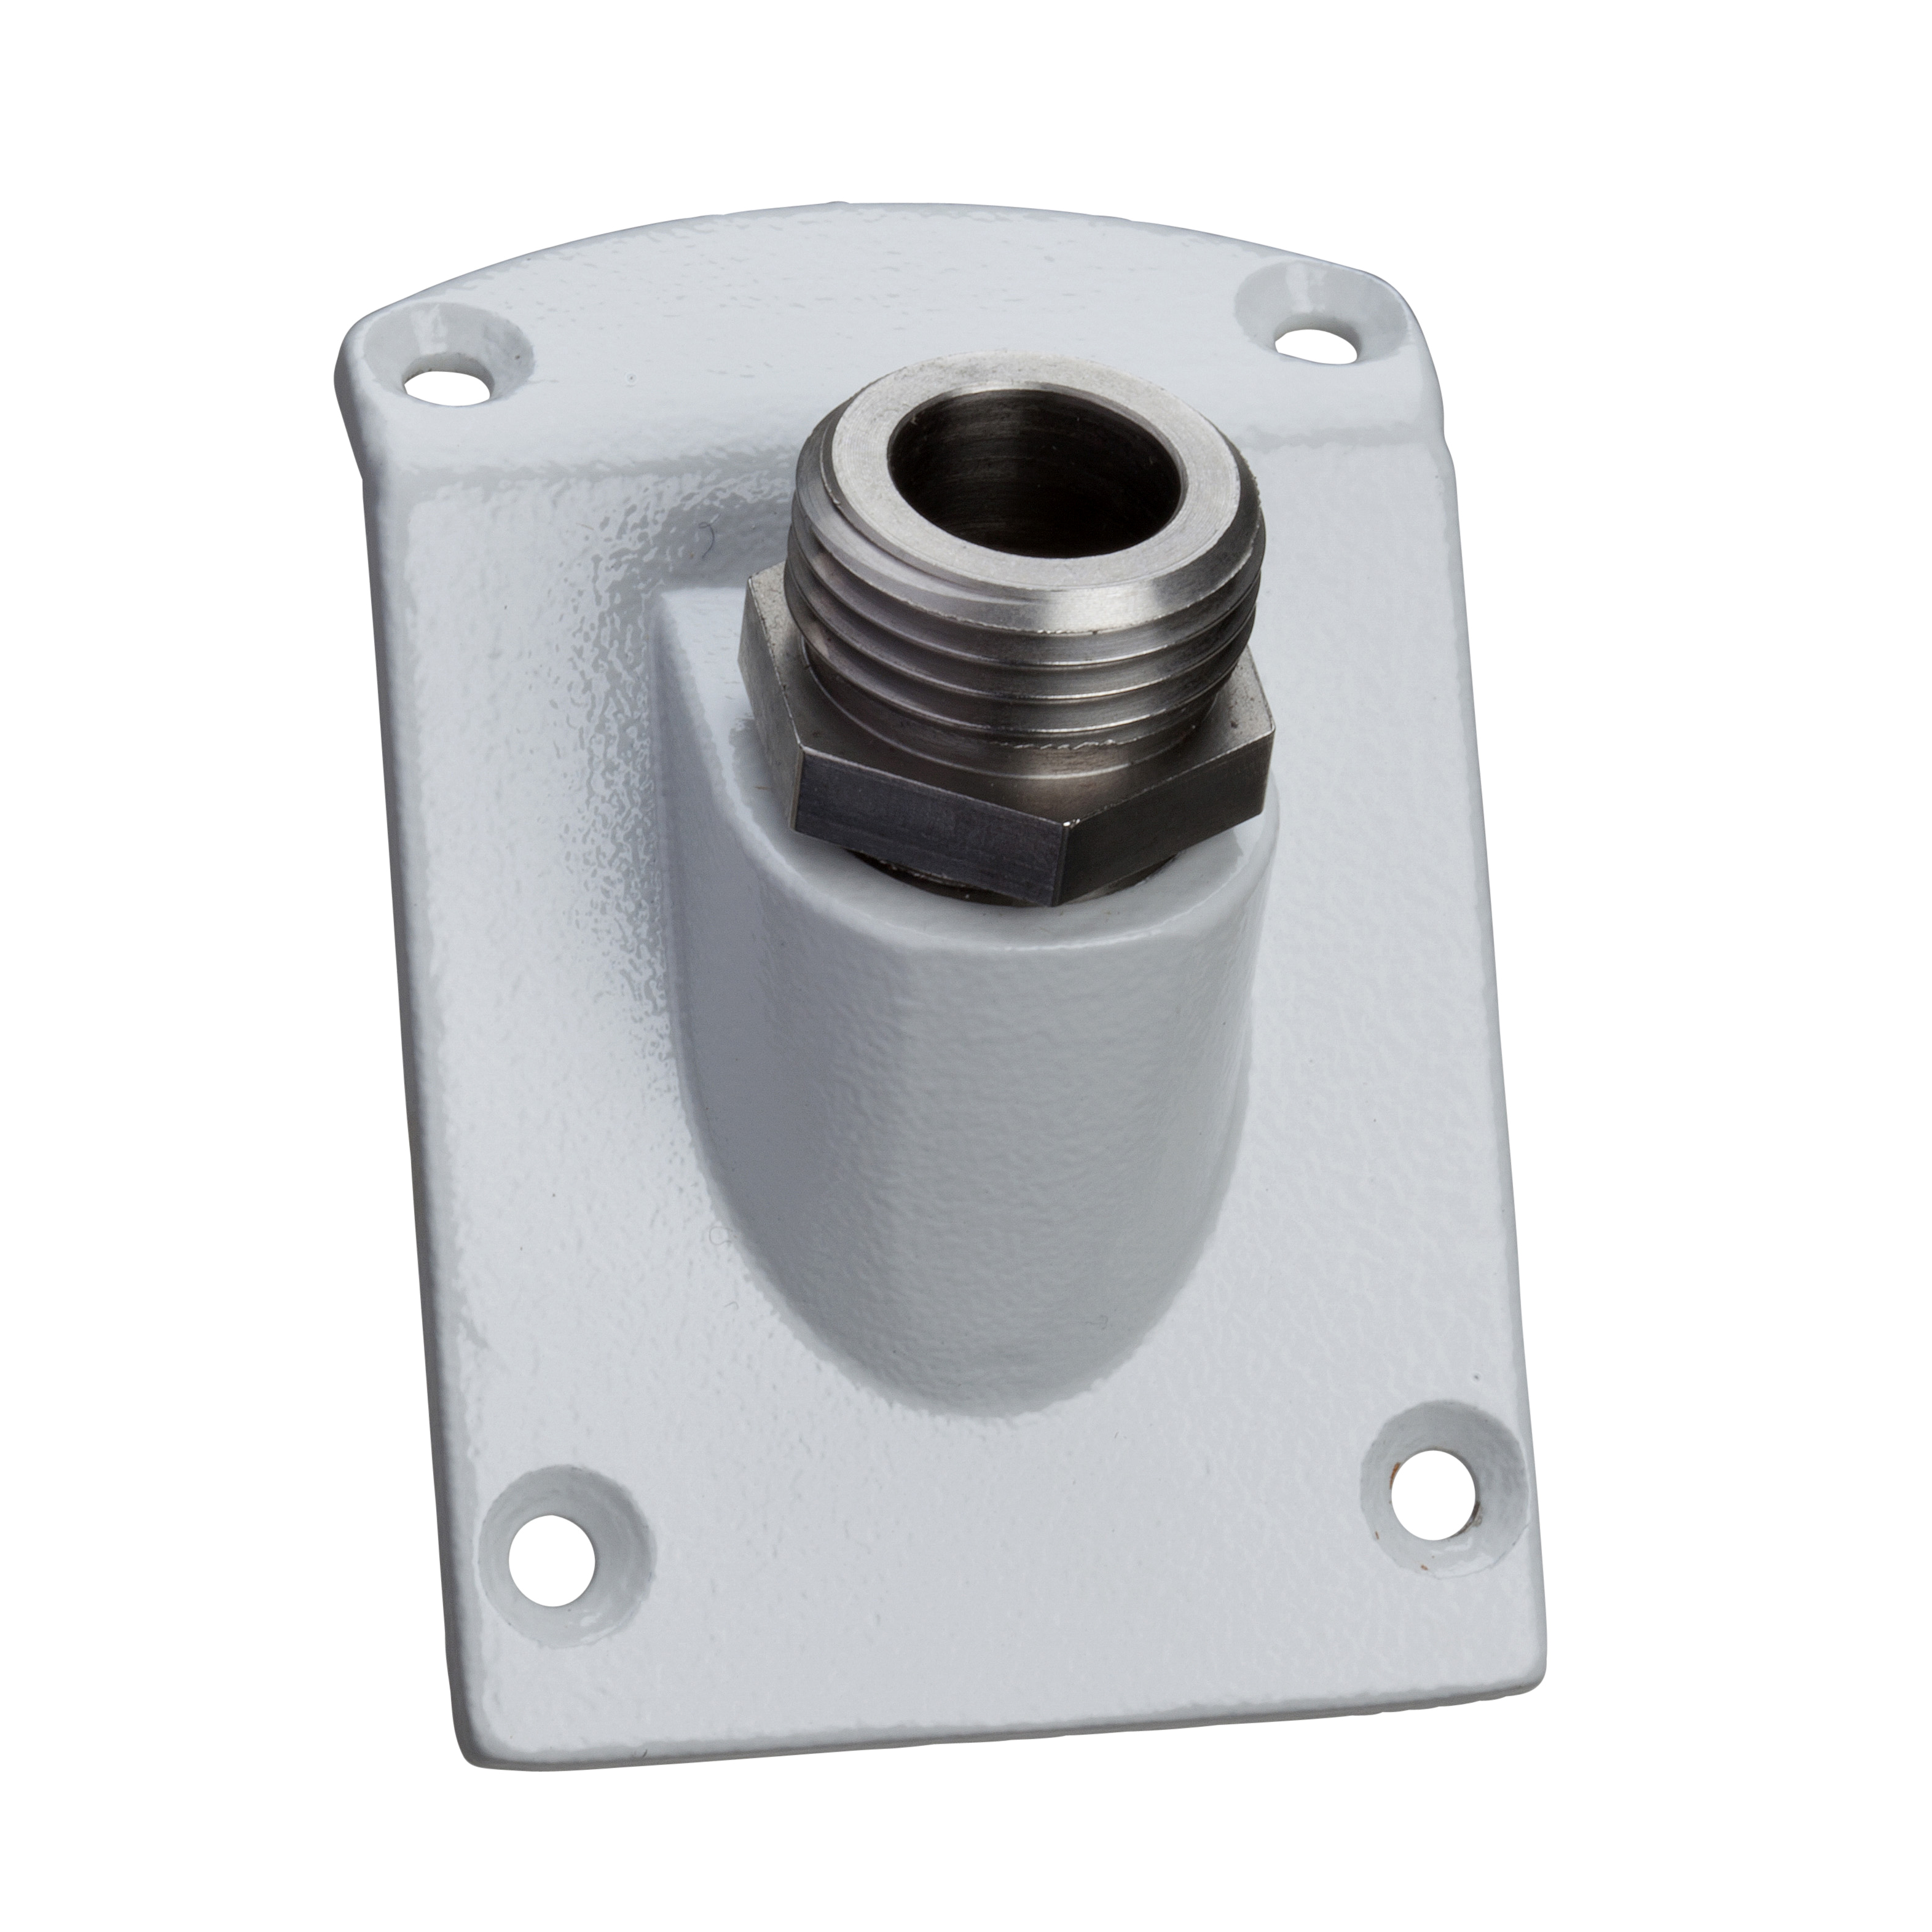 Signalling beacon adapter, square 80 mm RAL 7040. For S3CM HMI encl.